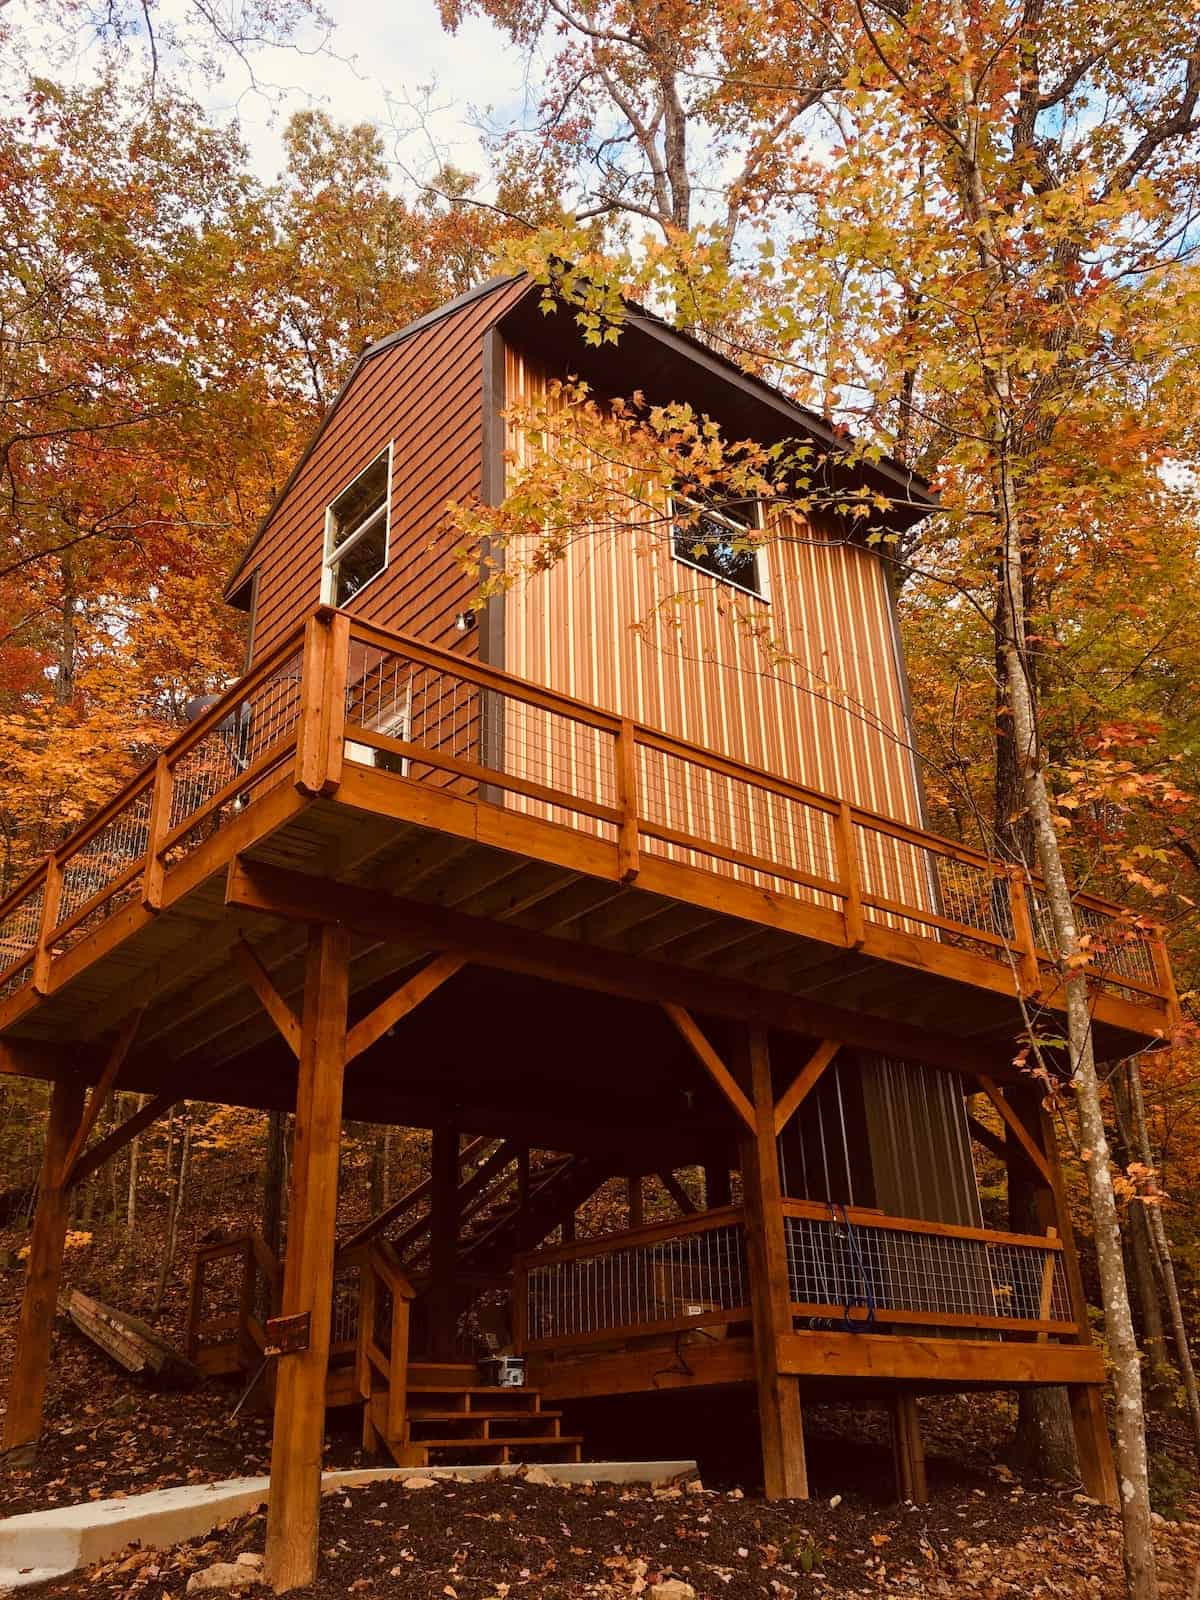 Image of treehouse rental in Tennessee